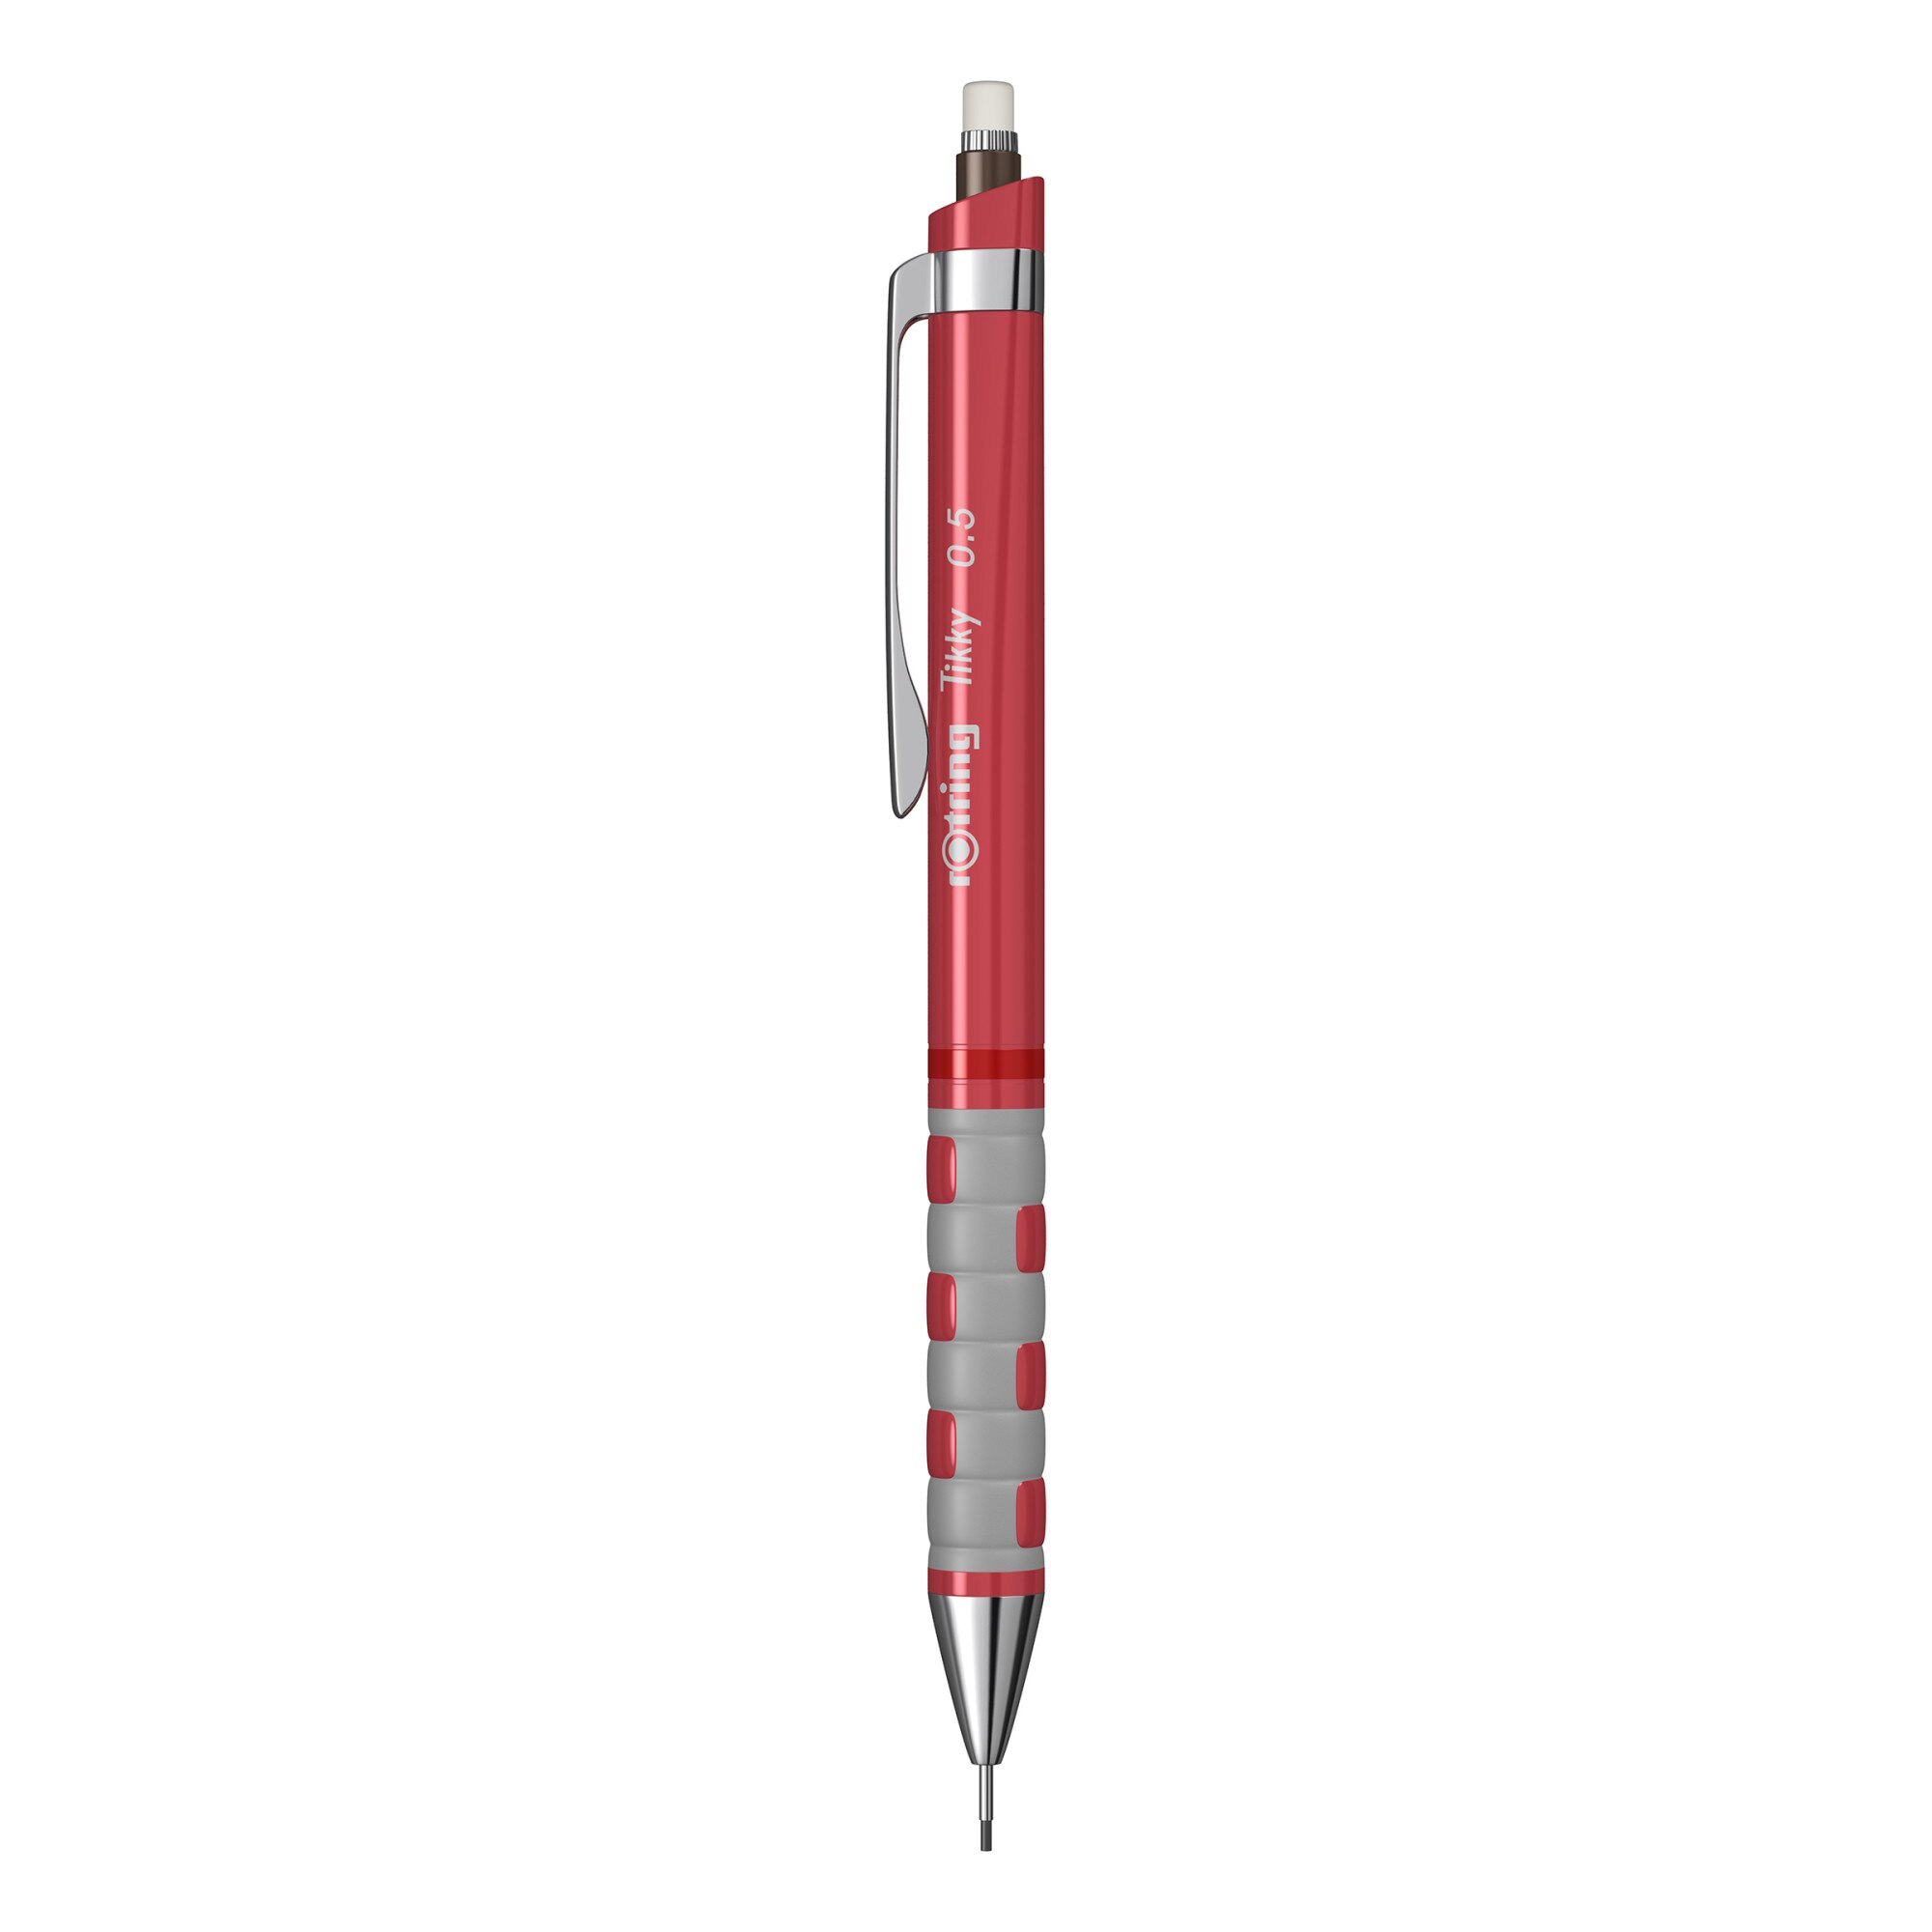 ROTRING TIKKY 0.5MM RED 1904699 MECHANICAL PENCIL